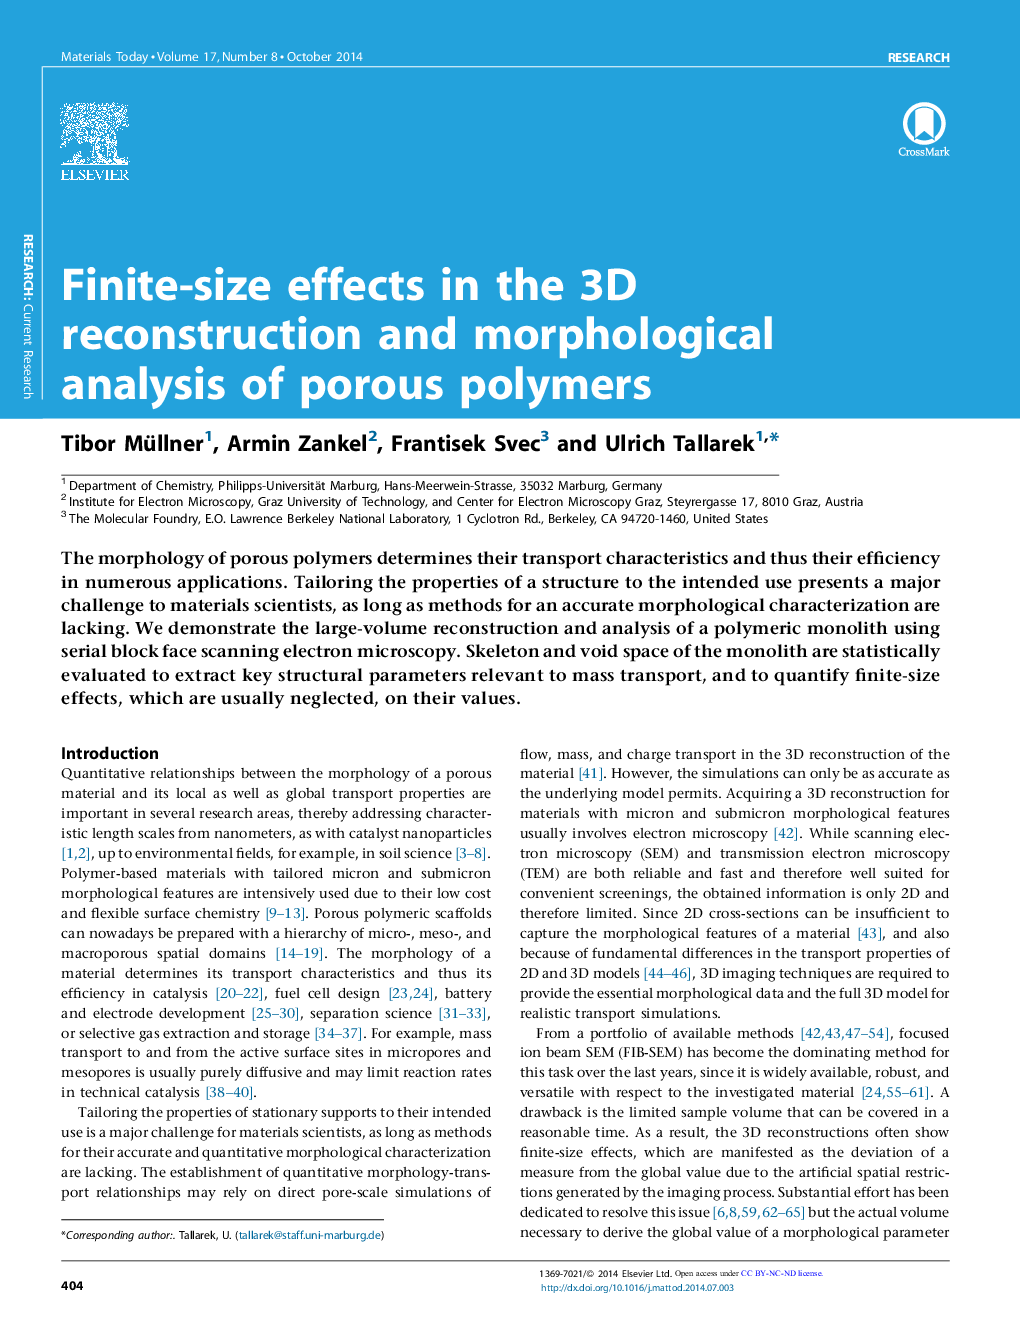 Finite-size effects in the 3D reconstruction and morphological analysis of porous polymers